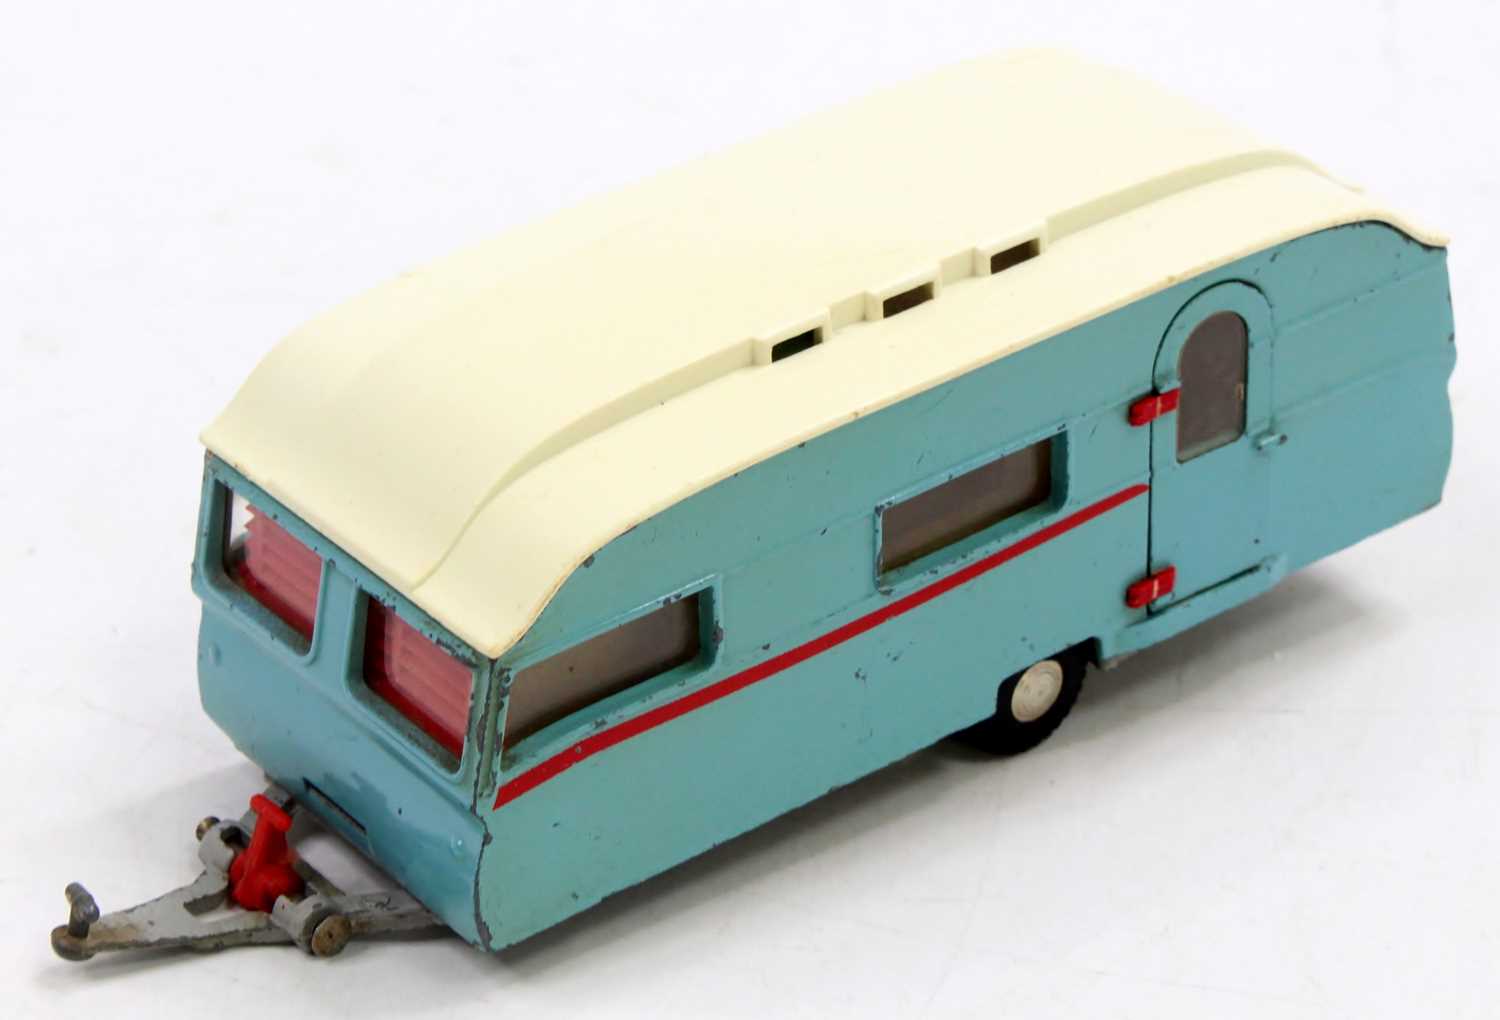 A Spot-On Models by Tri-Ang No. 265 18' Tourist Caravan comprising of light blue body with white